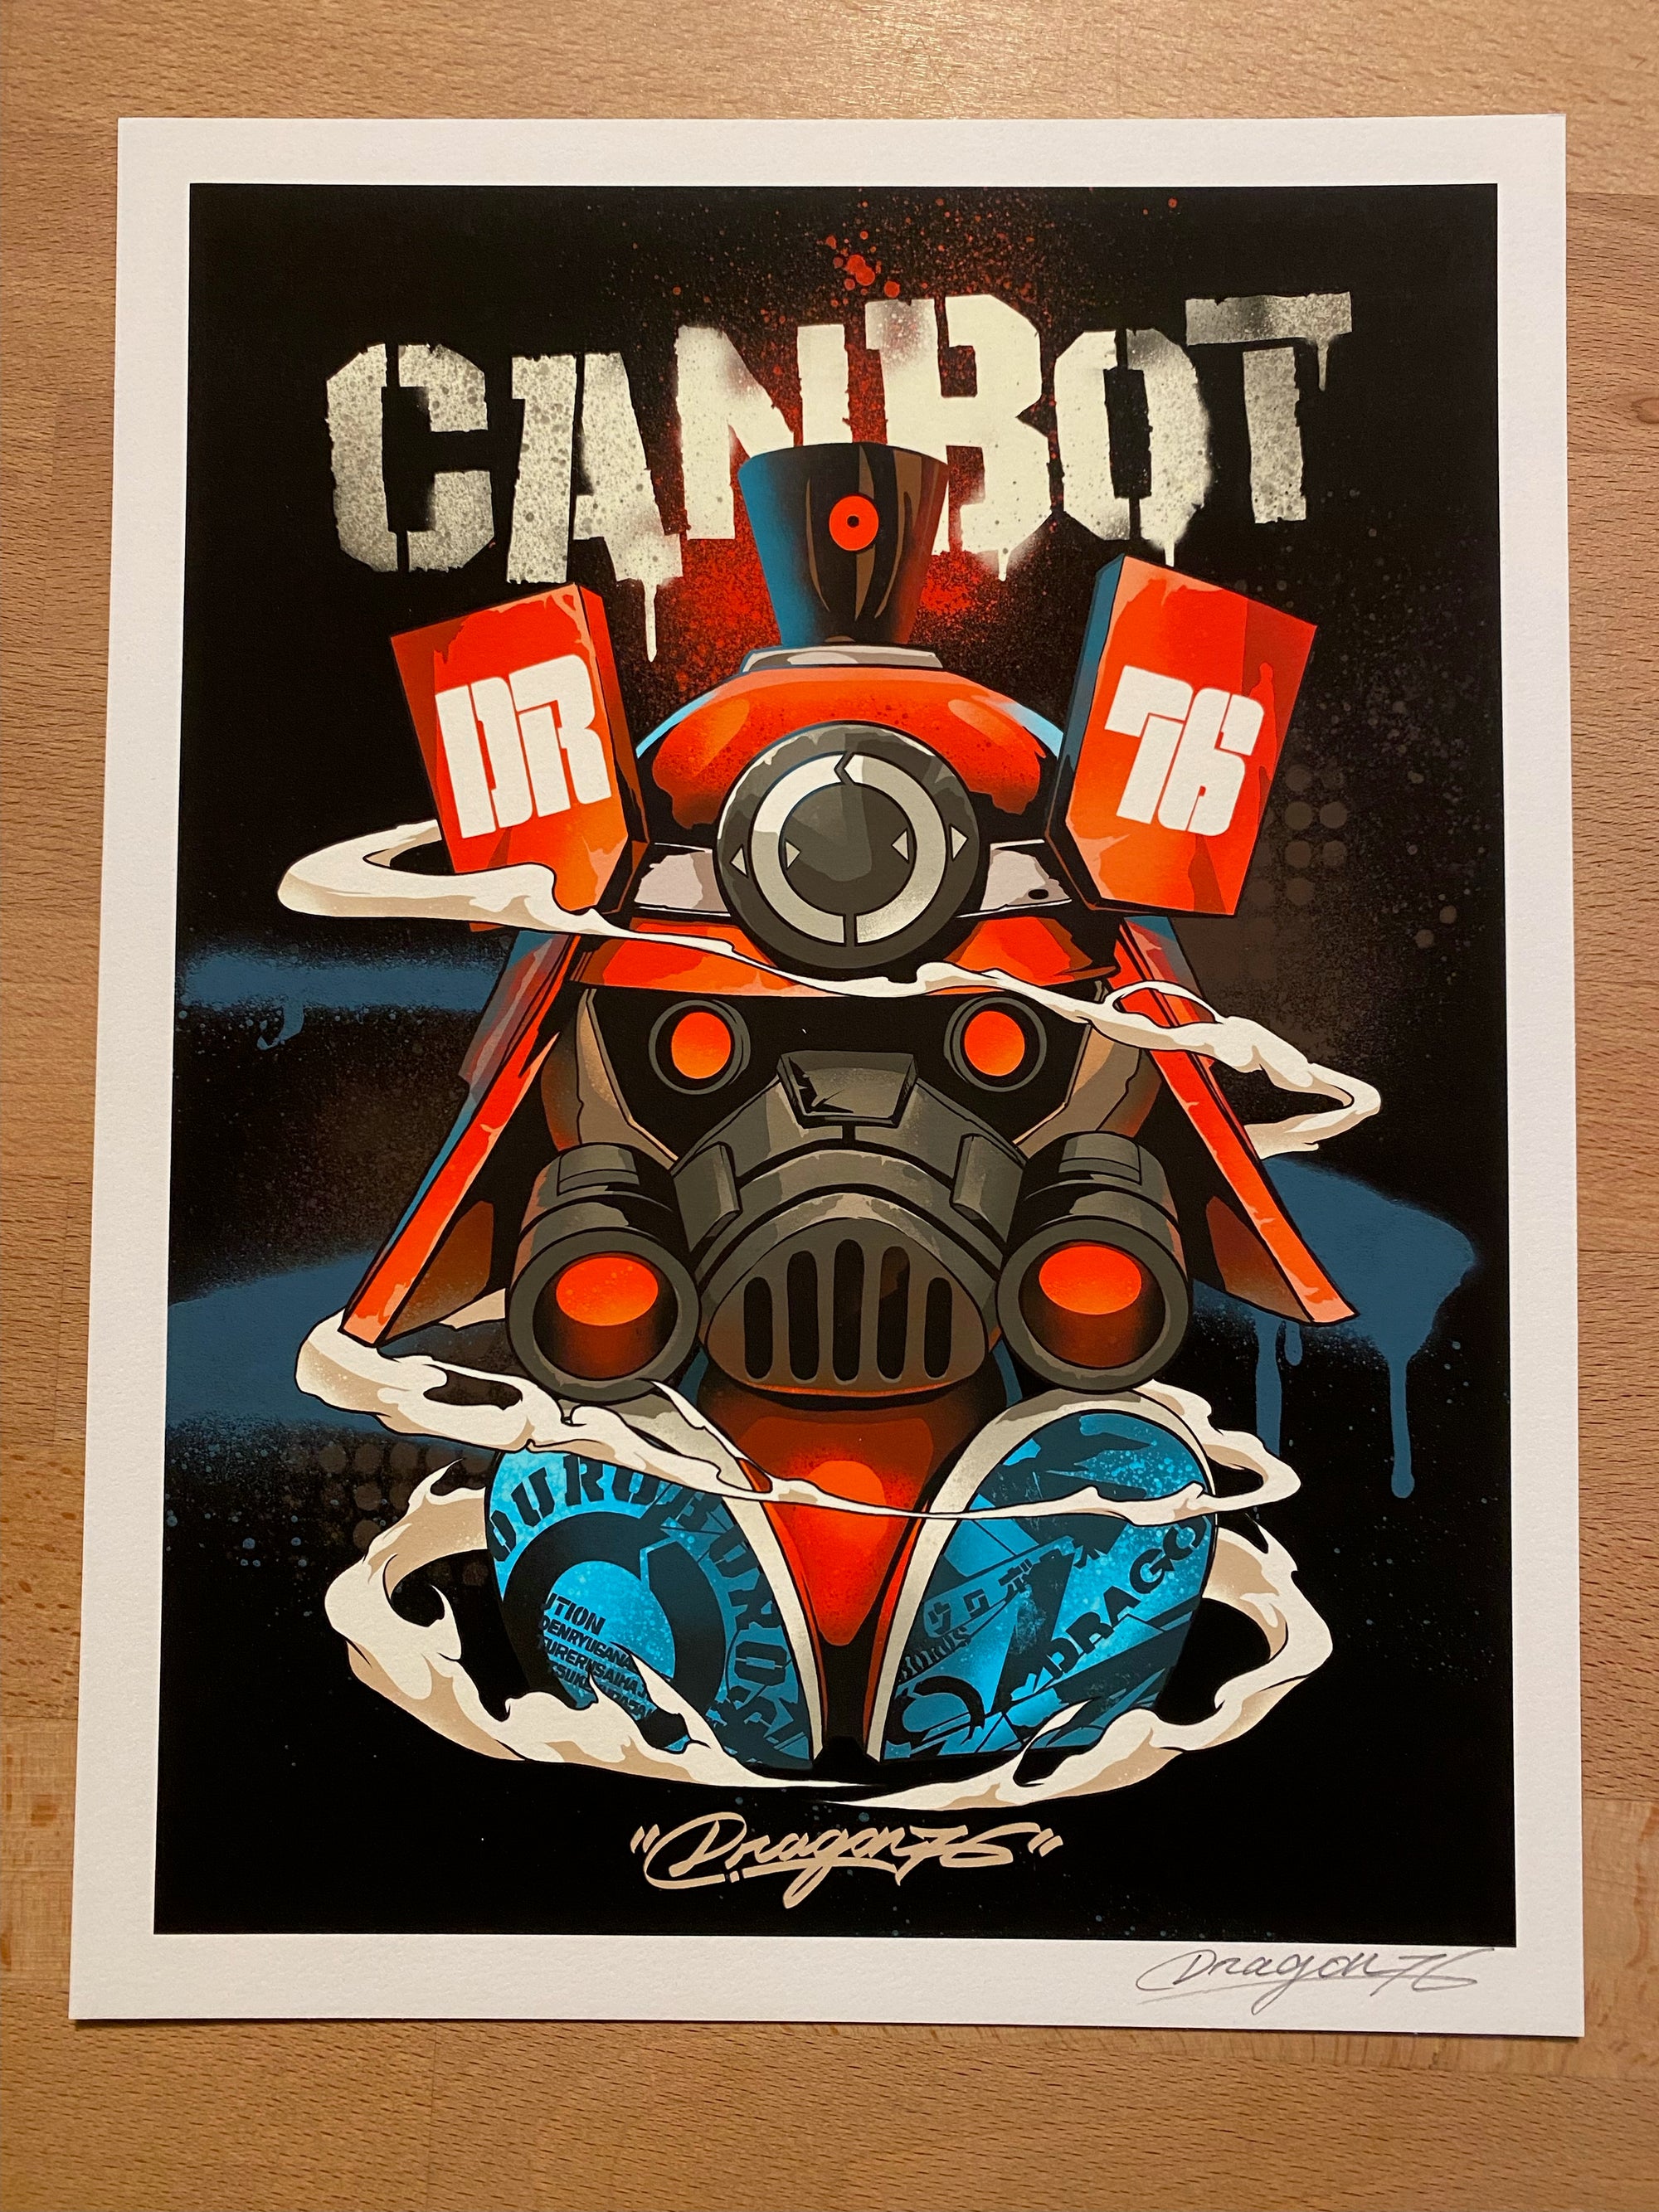 Dragon76 DR76 Red Canbot 5.5" Vinyl Art Figure with Signed Print – Limited Edition of 100 (Kidrobot.com Exclusive) - Kidrobot